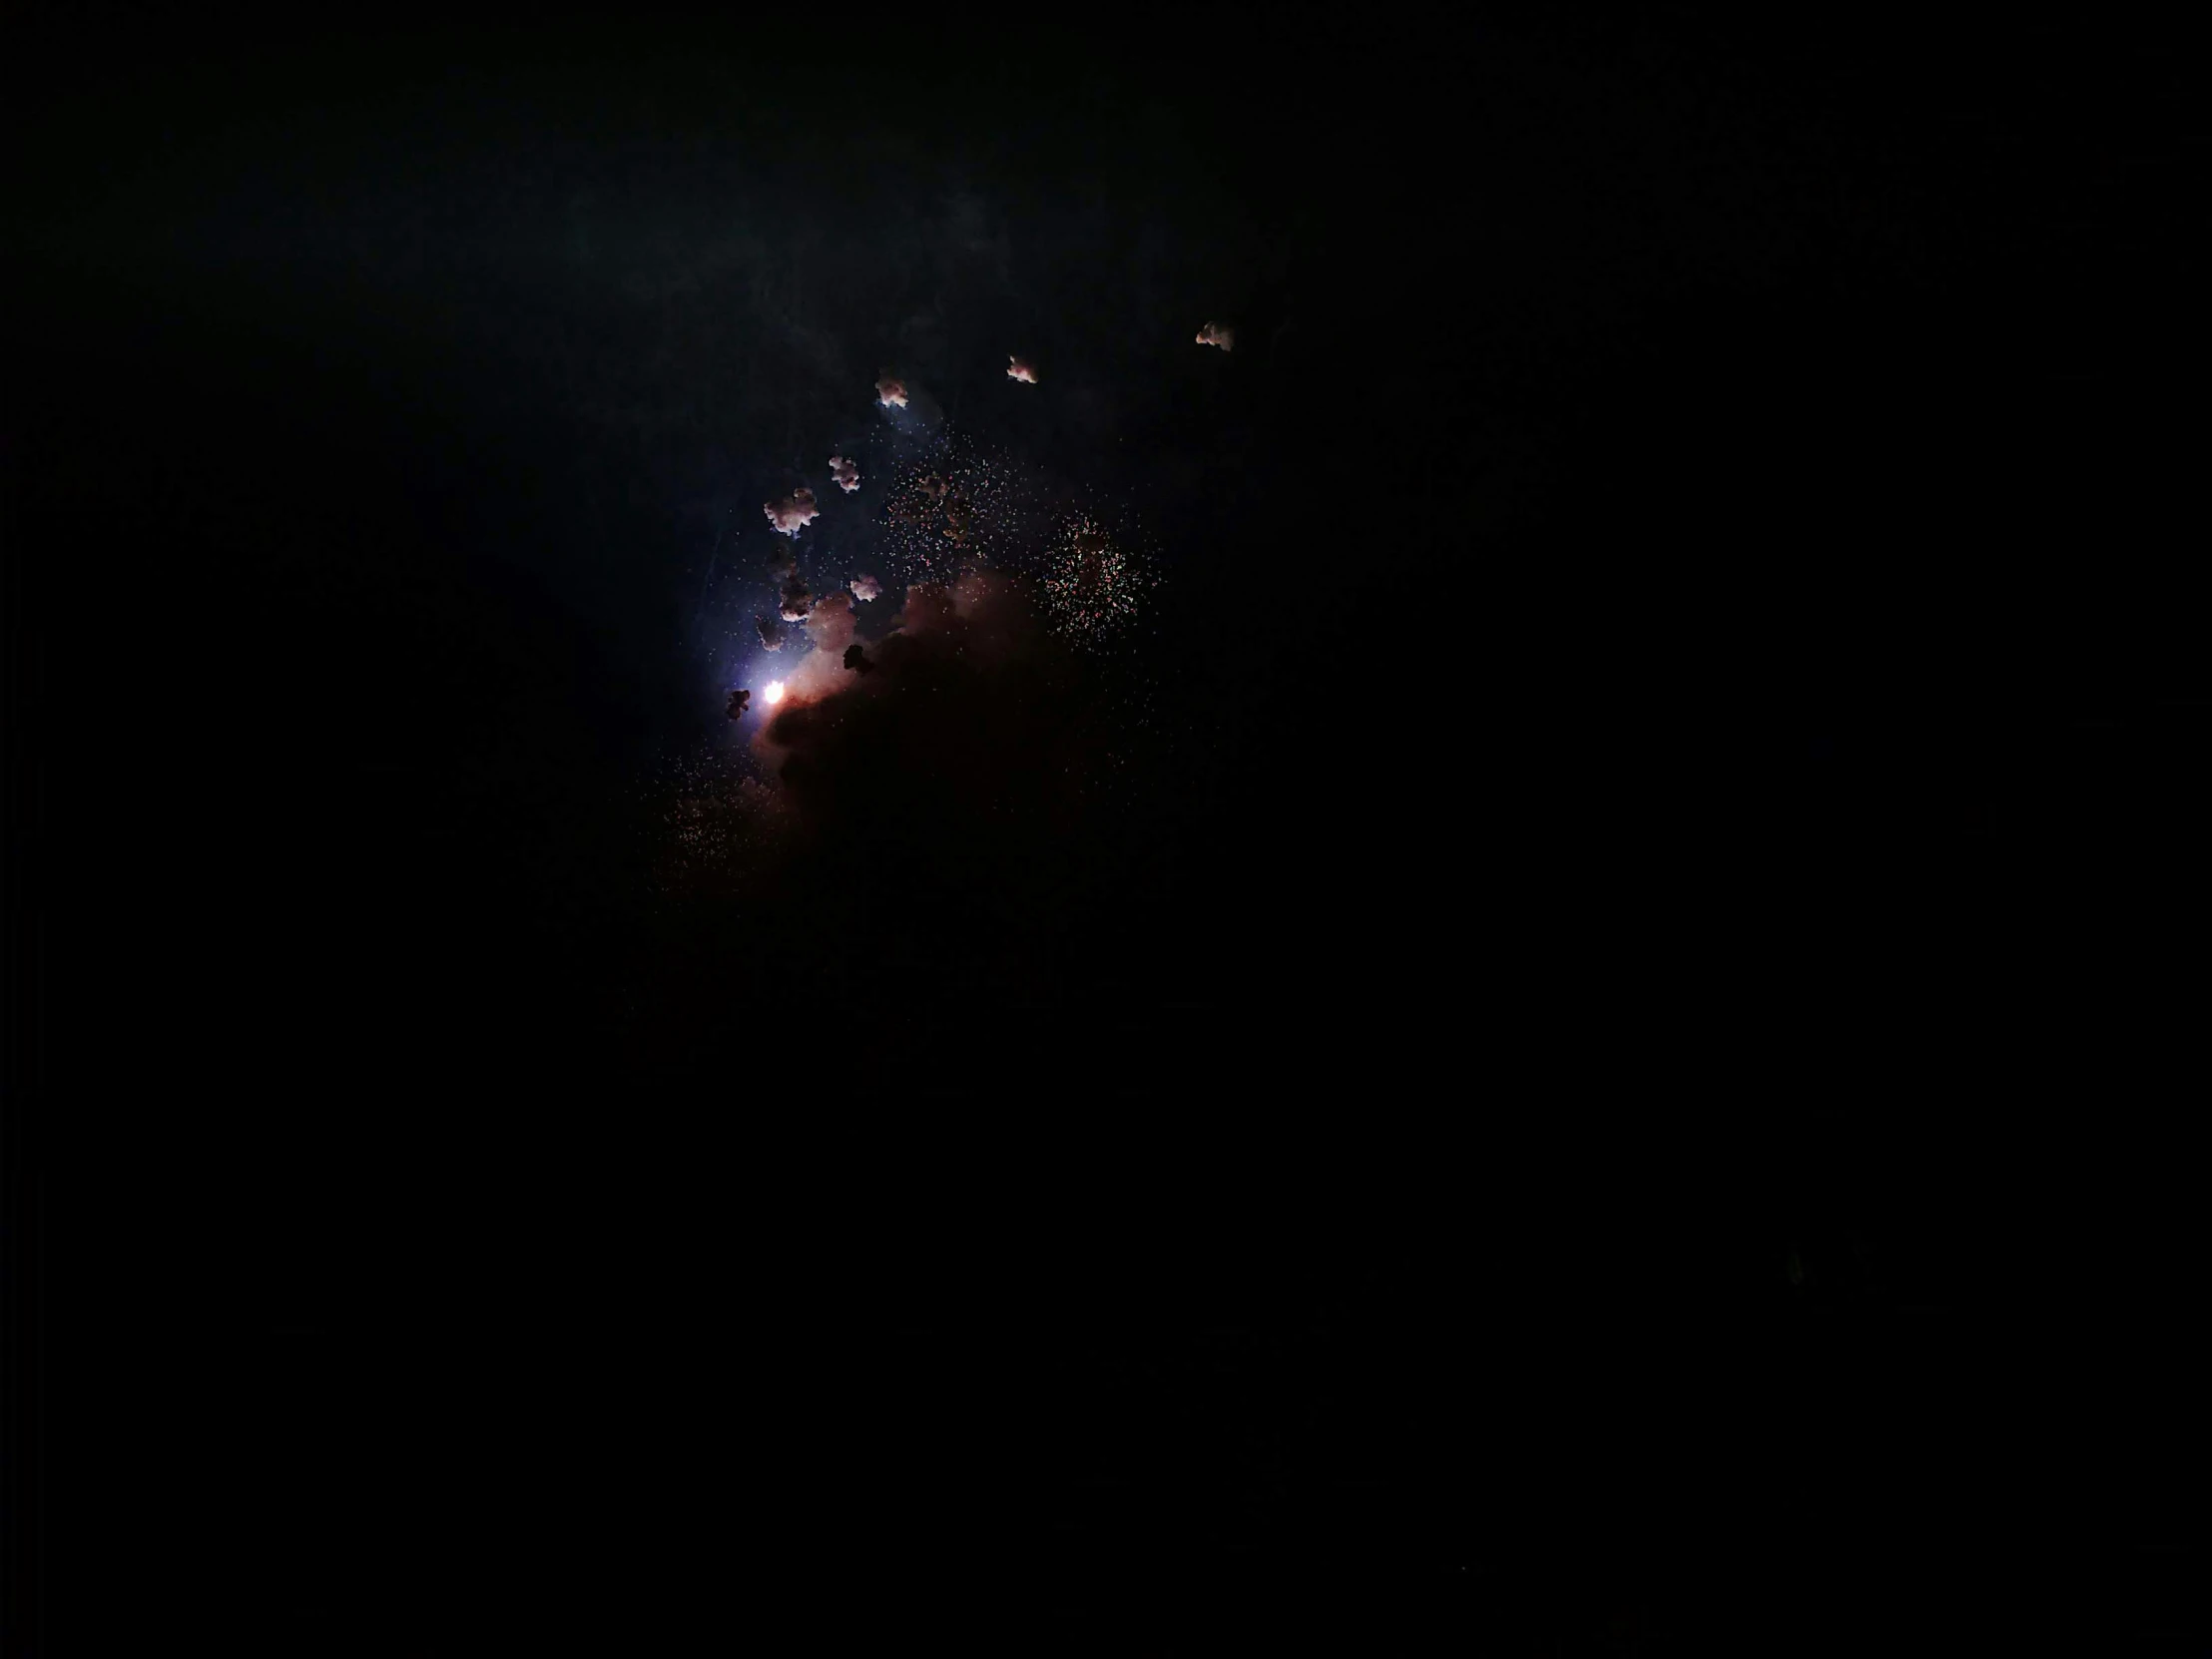 an image of fireworks exploding in the dark night sky